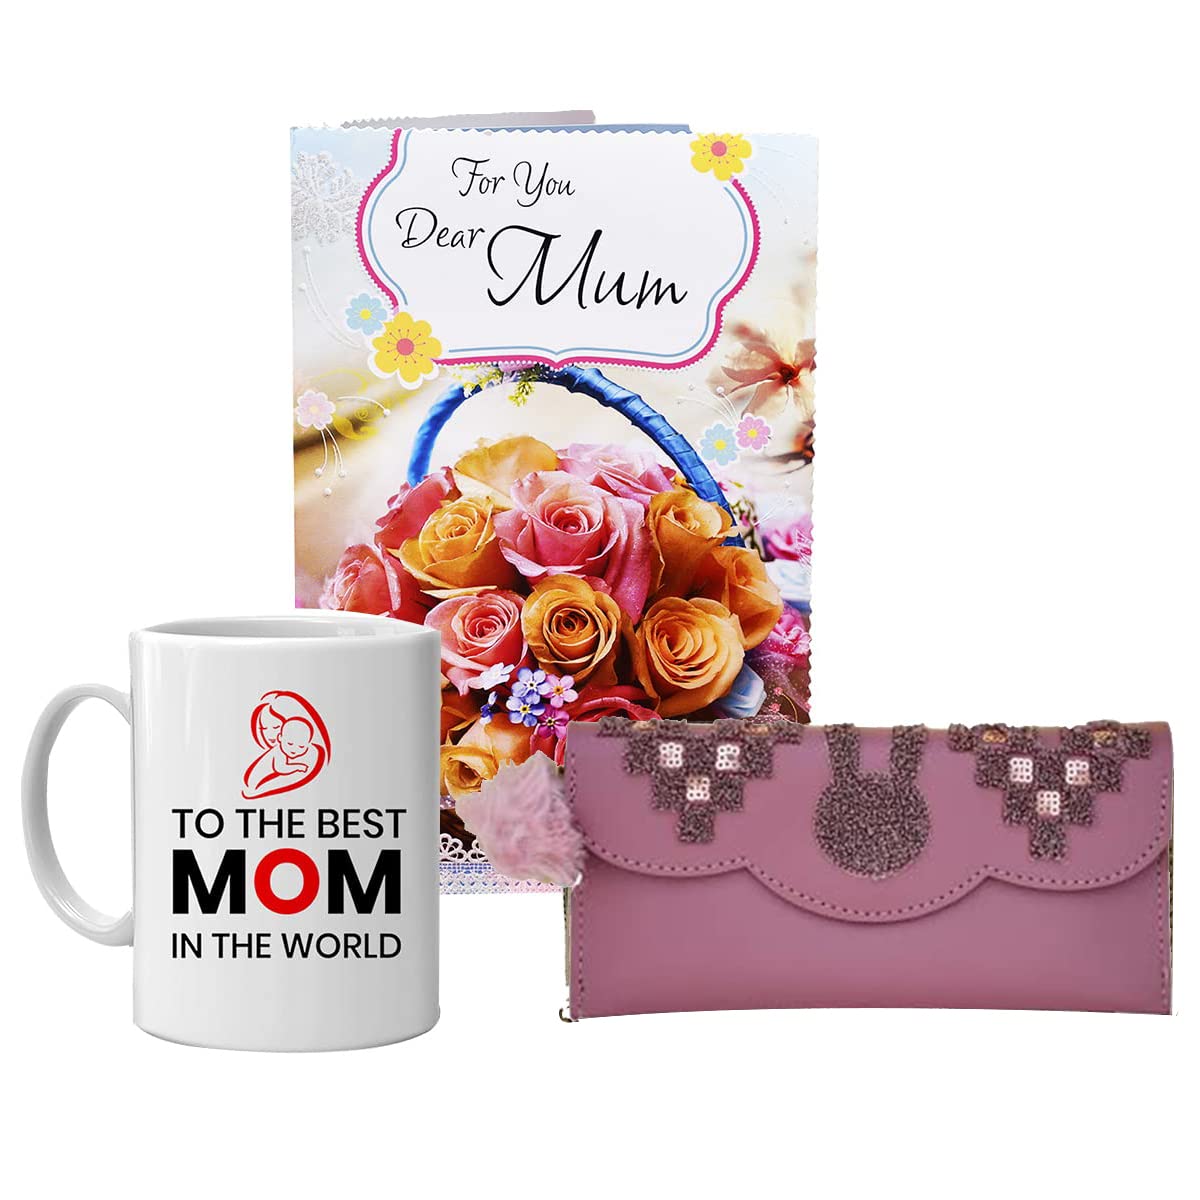 The Best Women's Day Gift For The Super Women in Your Life